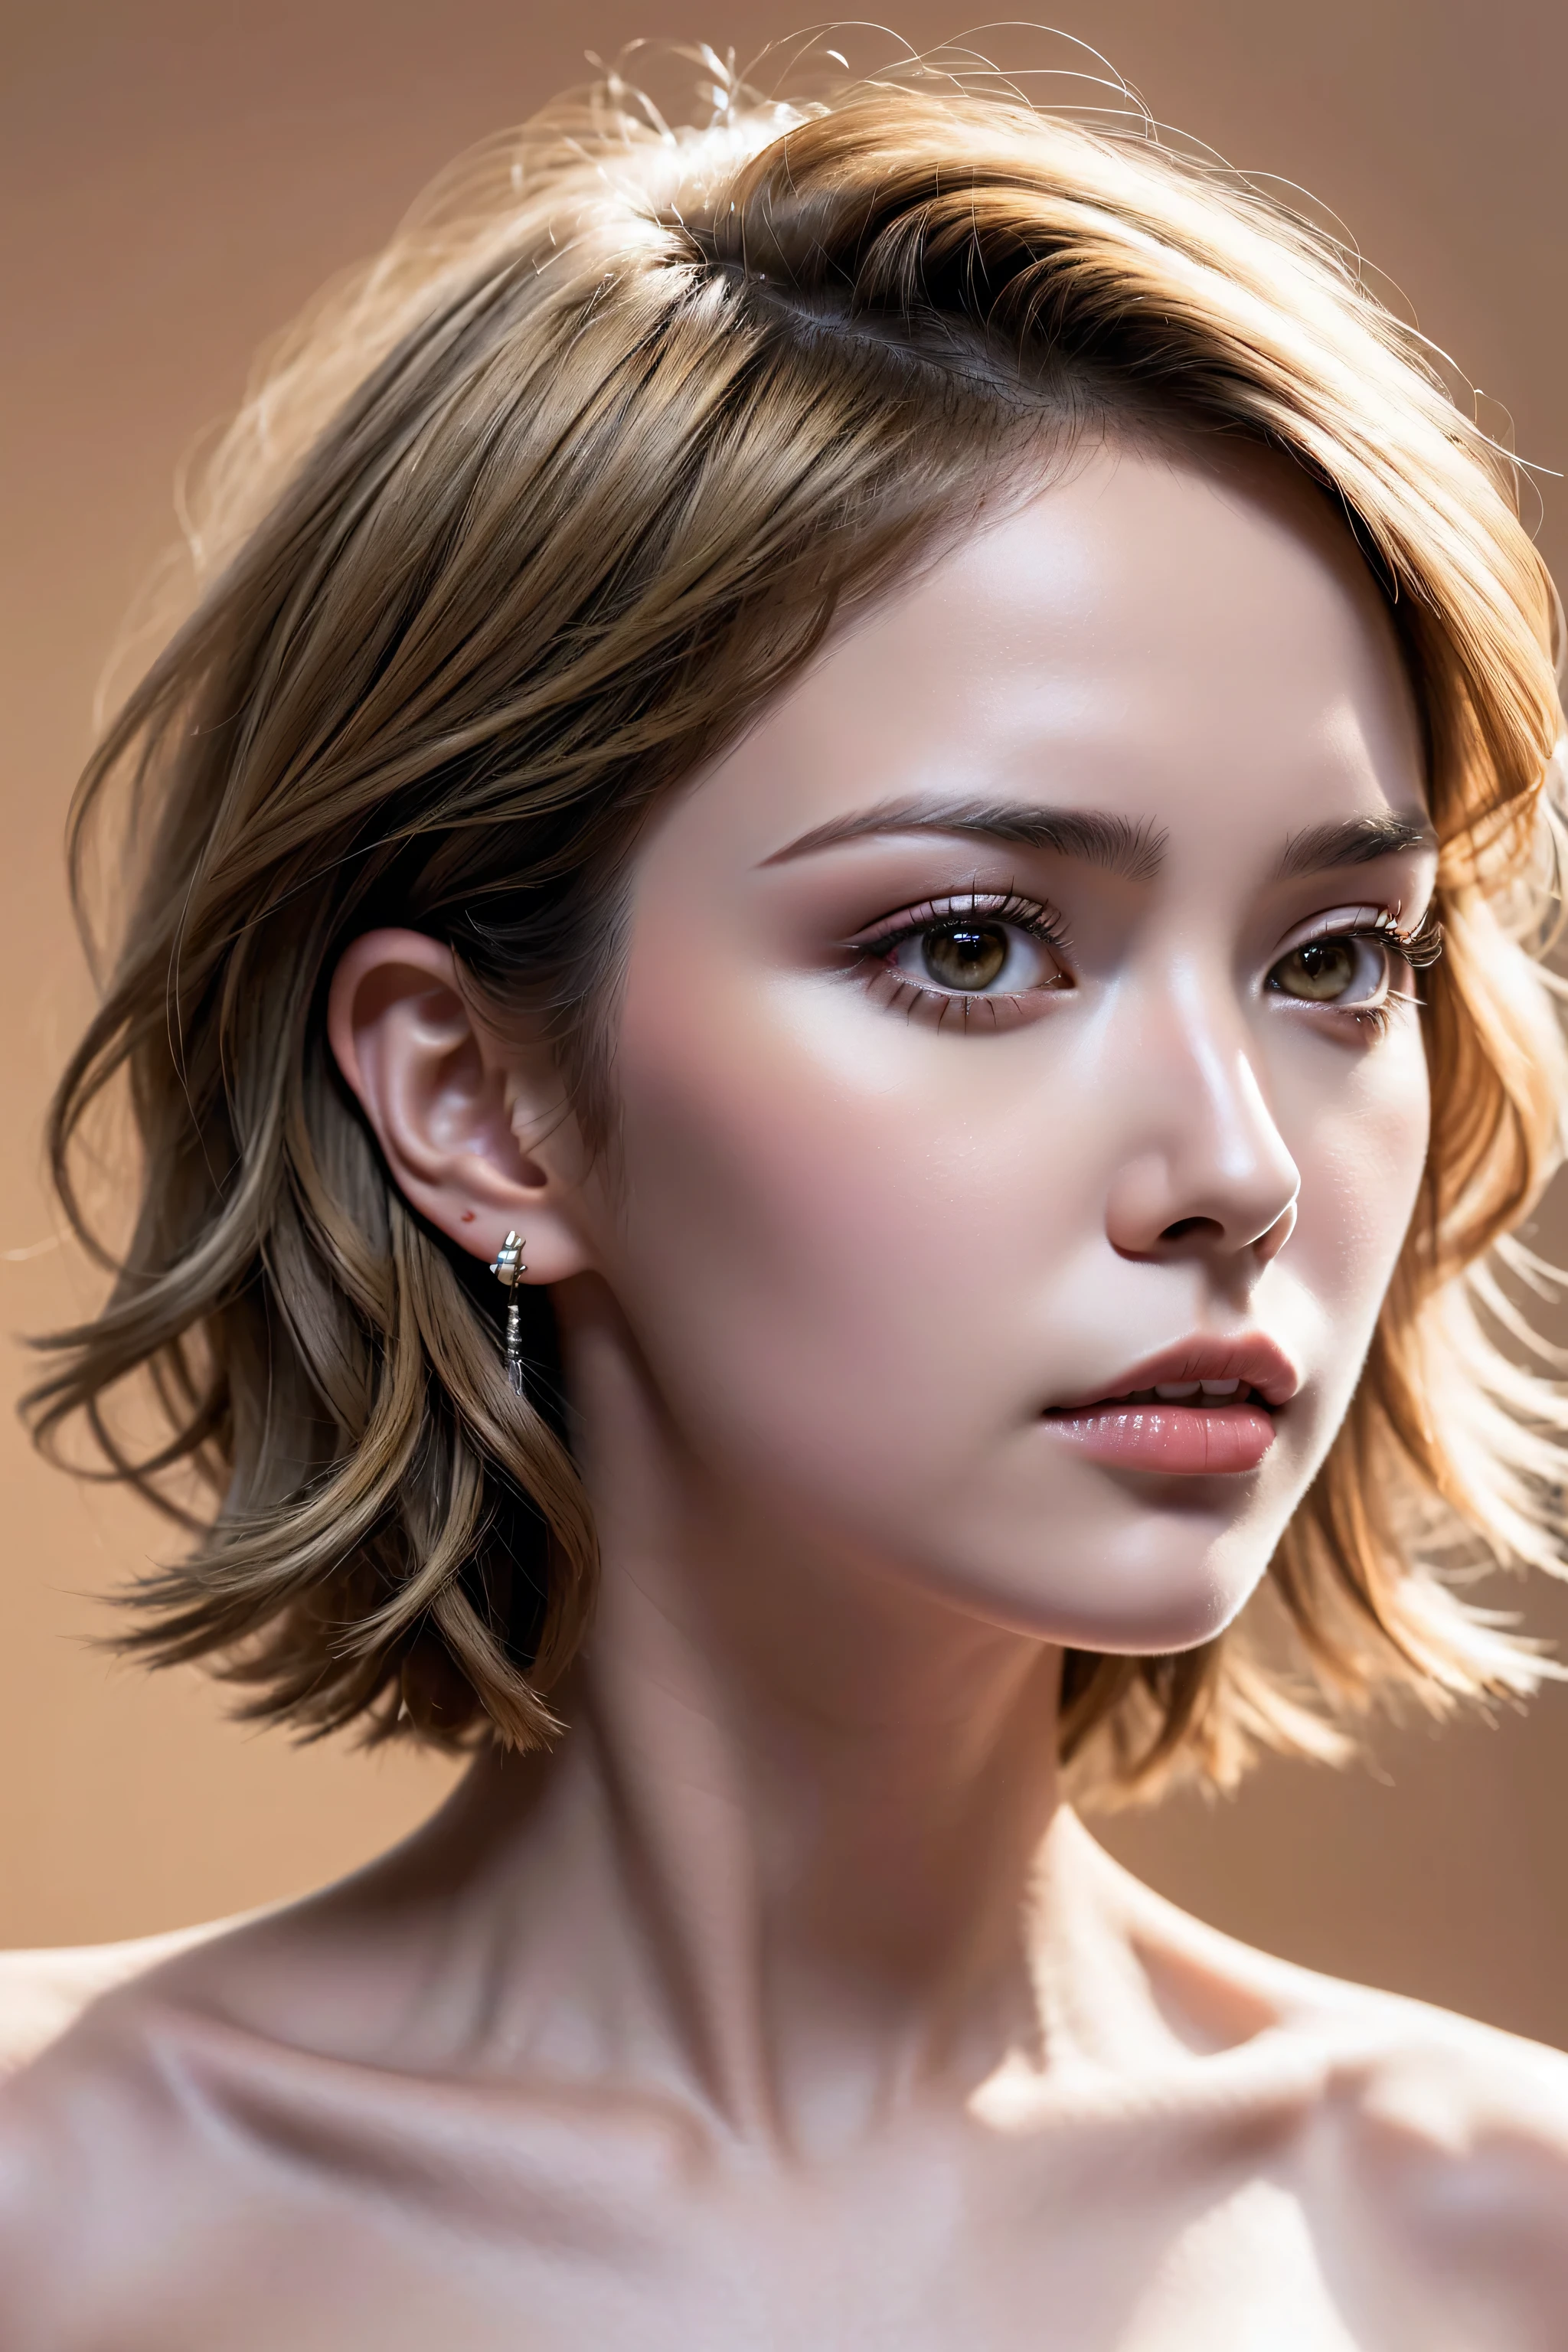 Realism, a realistic photo of (1girl:1.3, 20-year-old), ((in a photo studio)), (Warm color background:1.25), ((short blonde hair, (wavy, combed up, behind the ear), extremely detailed:1.35)), (extremely detailed CG unity 8k wallpaper), (best high quality real texture skin:1.3, A woman with velvety skin:1.2), ((best high quality real texture hair)), photo of the most beautiful artwork in the world, professional majestic (photography by Steve McCurry), 8k uhd, dslr, soft lighting, high quality, Fujifilm XT3 sharp focus, f 5.6, High Detail, dramatic, ((Dynamic position:1.4)), ((look right, look left, up and down)), , ,((wide shot from random side of face:1.4)), Wear a white tank top, (the most absurd quality perfect eyes:1.15), ((super beautiful cute sharp-face)), (light pale complexion), ((clear no blur and sharp perfect round realistic brown_eyes:1.25), ultra details), ((finely detailed pupils:1.2)), ((detailed symmetrical lips:1.3)), pink_lipstick:1.25, (natural light), ((zoom out the camera))